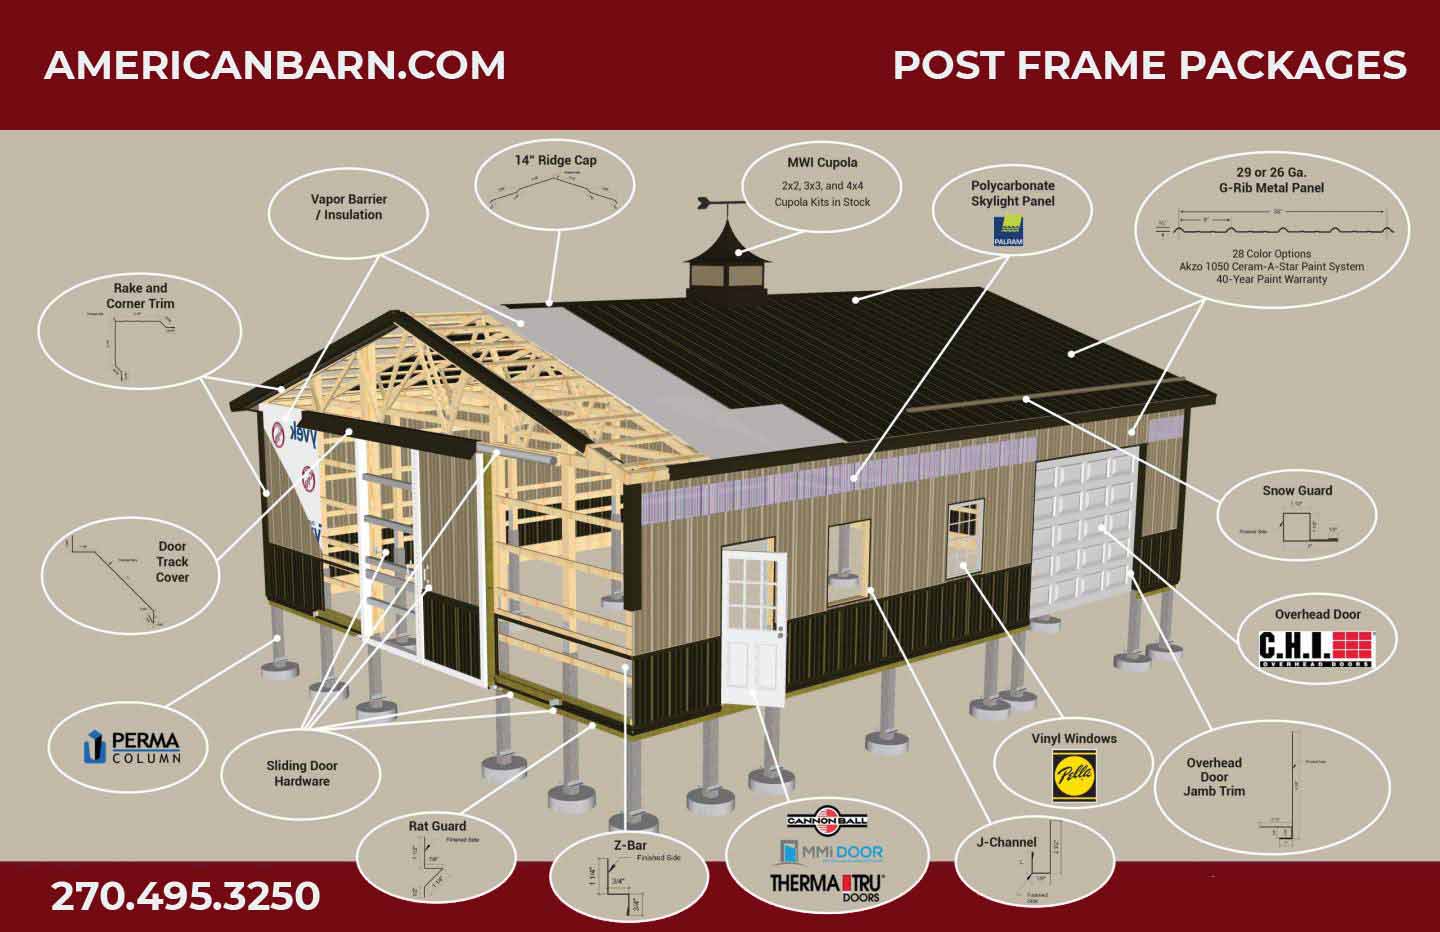 model of a post frame home showing components of the home that are offered with American Barn